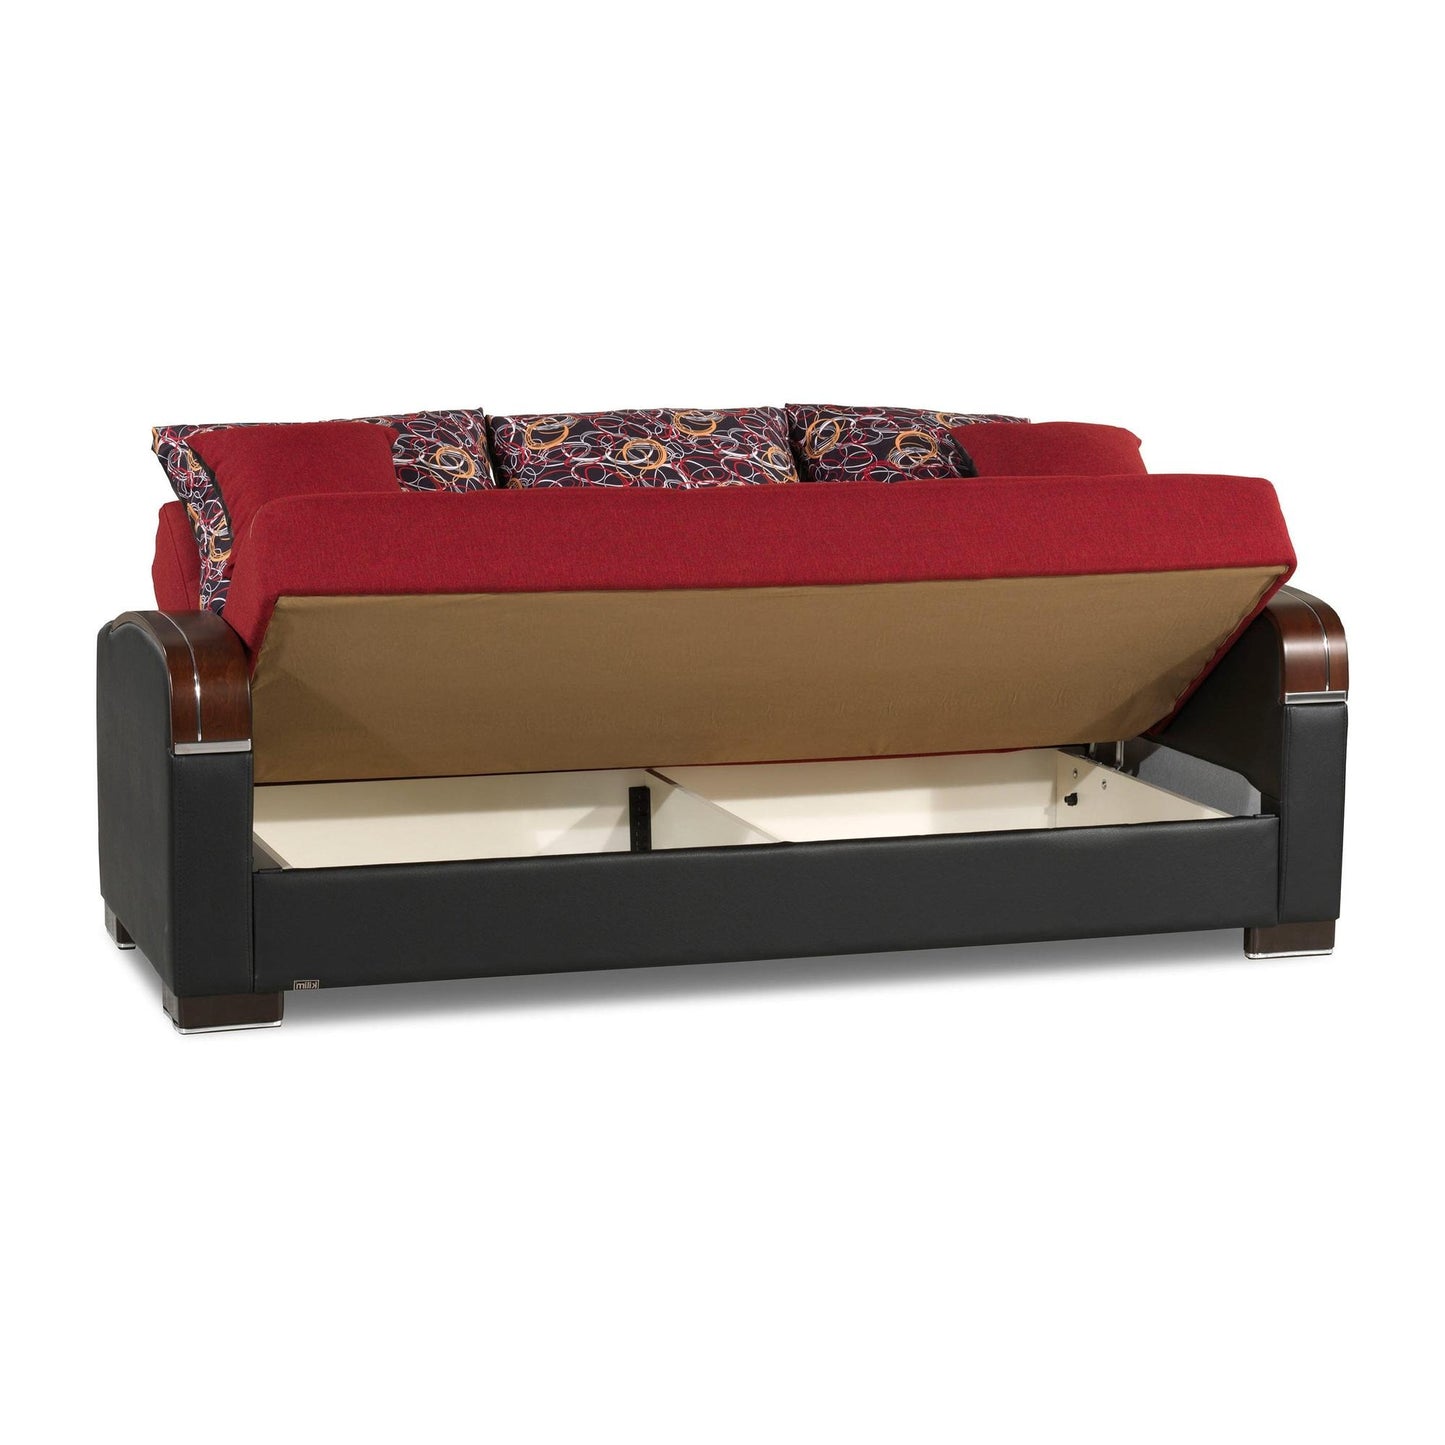 Mobimax Sofa Bed in Red